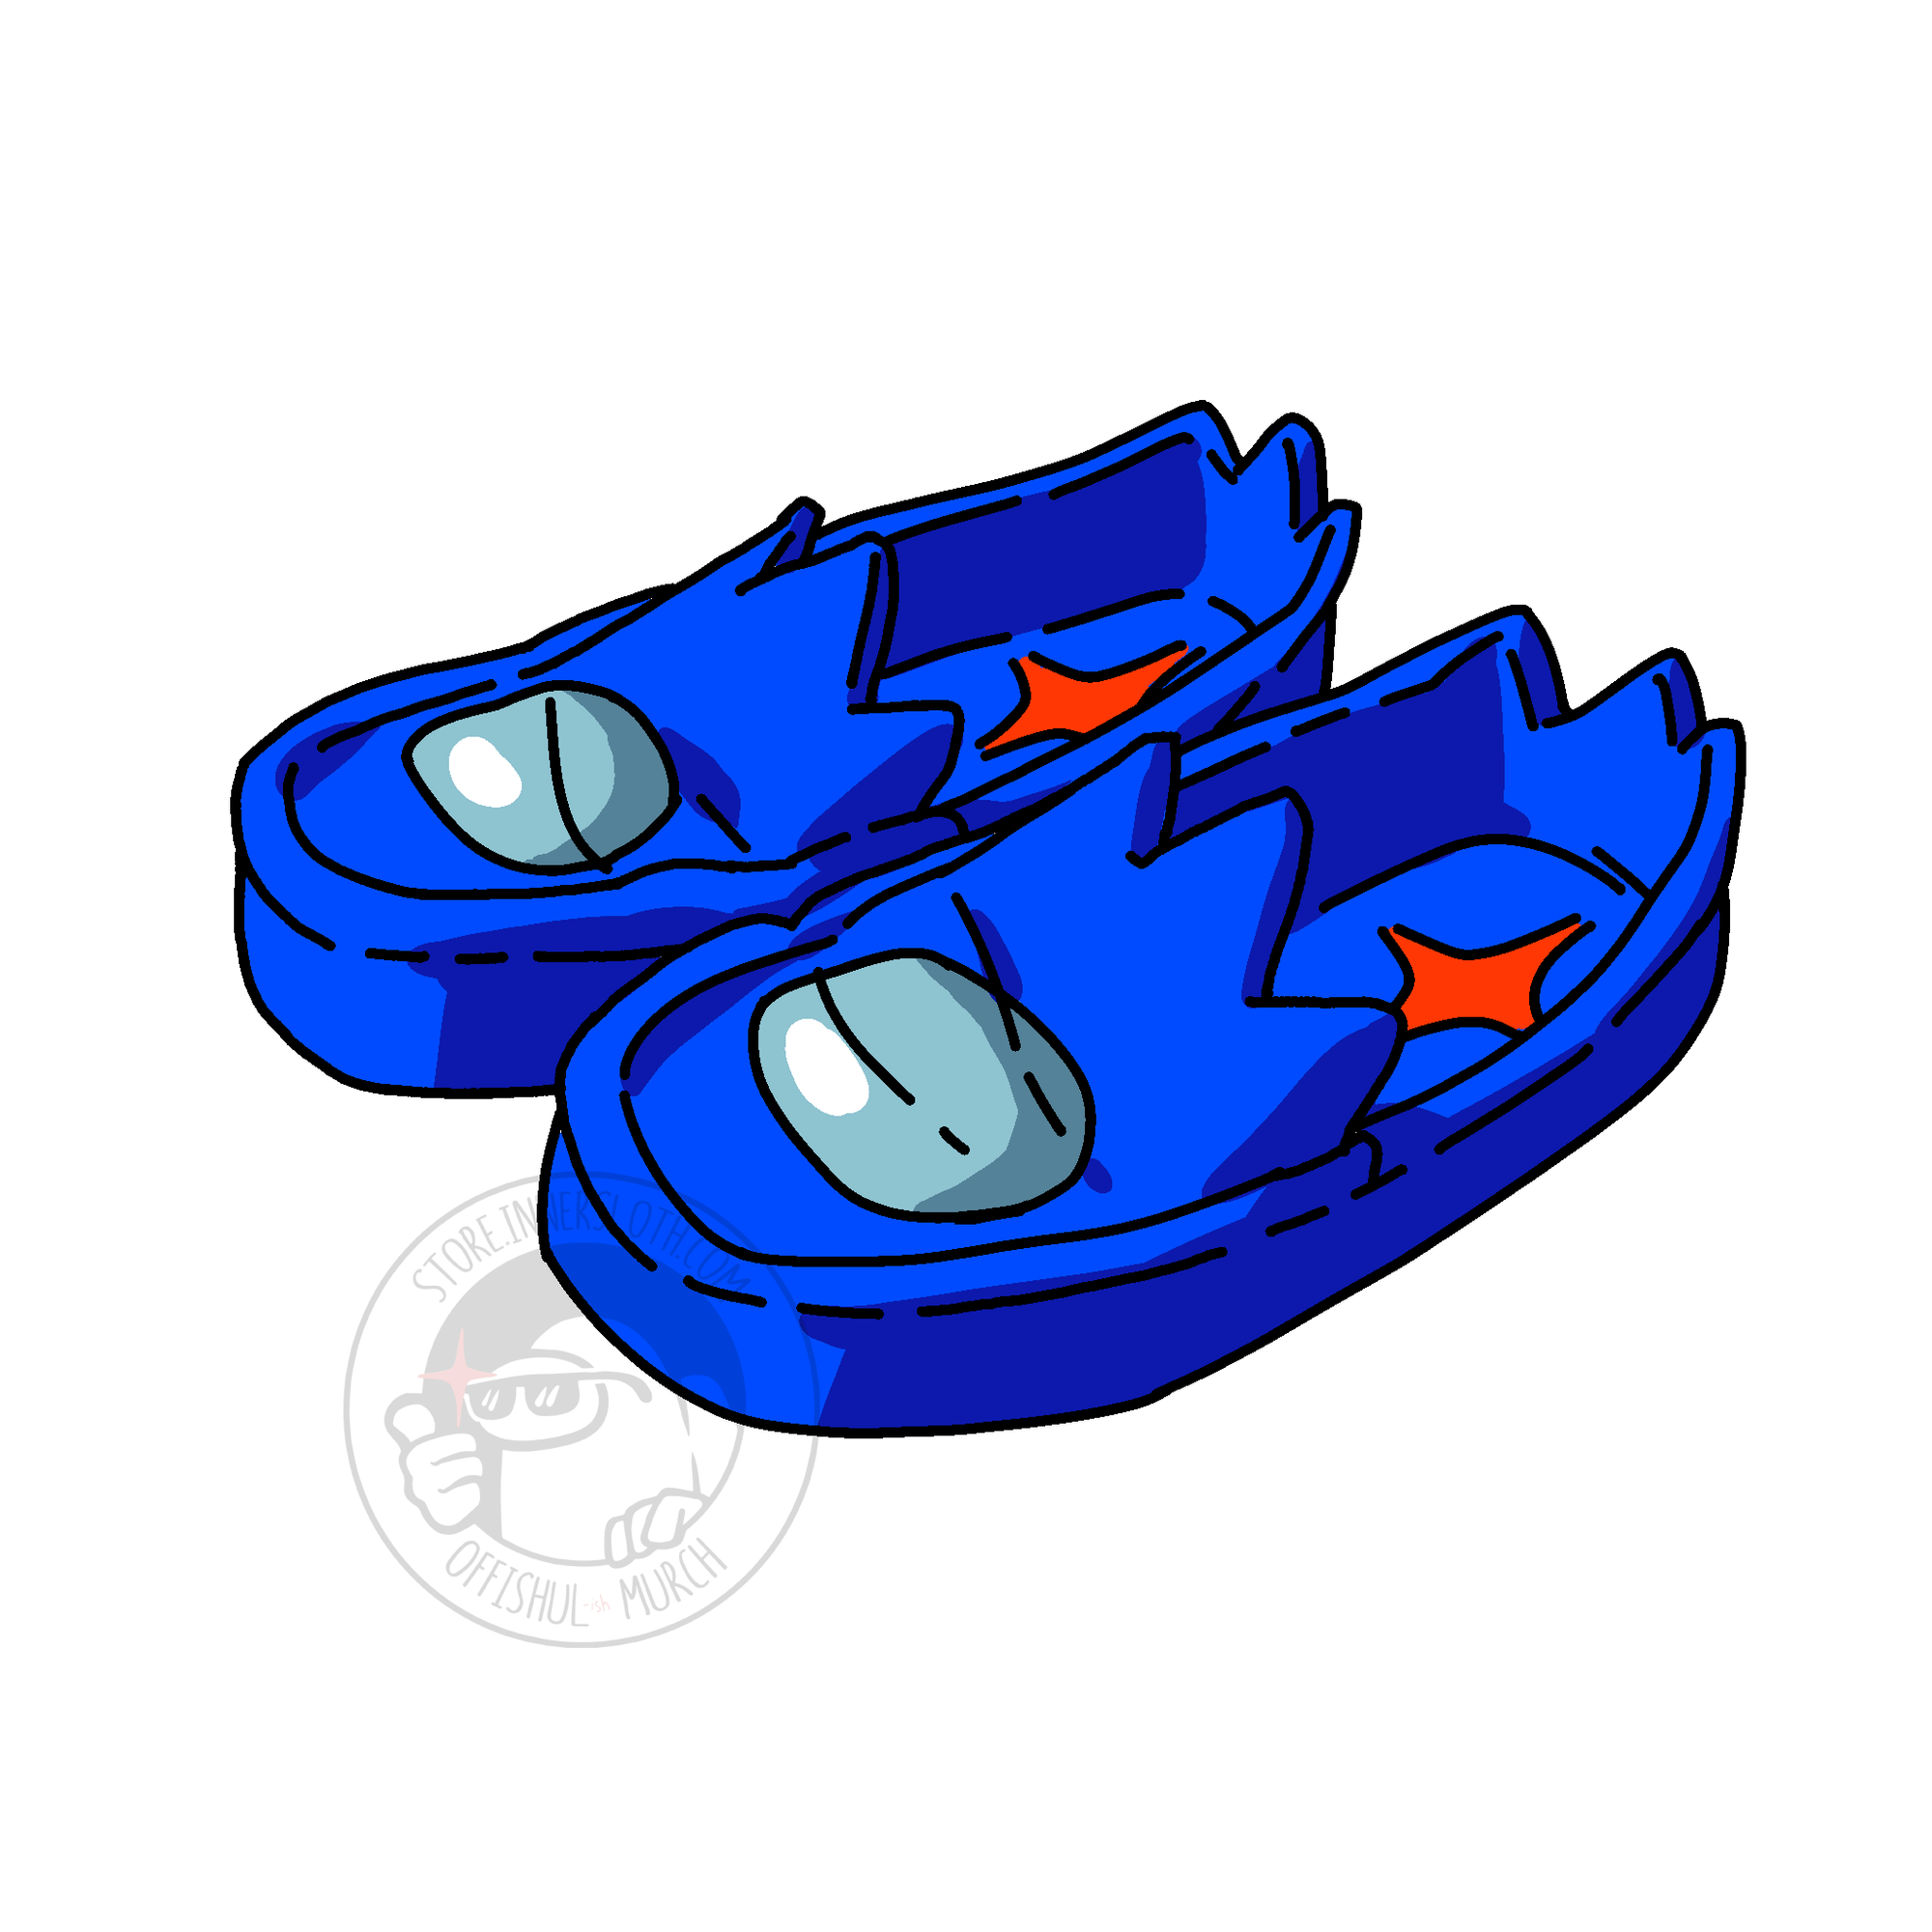 An illustration of blue Impostor slippers by Jemma Salume. The tongue and heel tab of the slippers are shaped like the Impostor’s mouth. The slipper uppers have a crewmate visor emblem on each shoe. Each slipper has a red Impostor shine on the inside